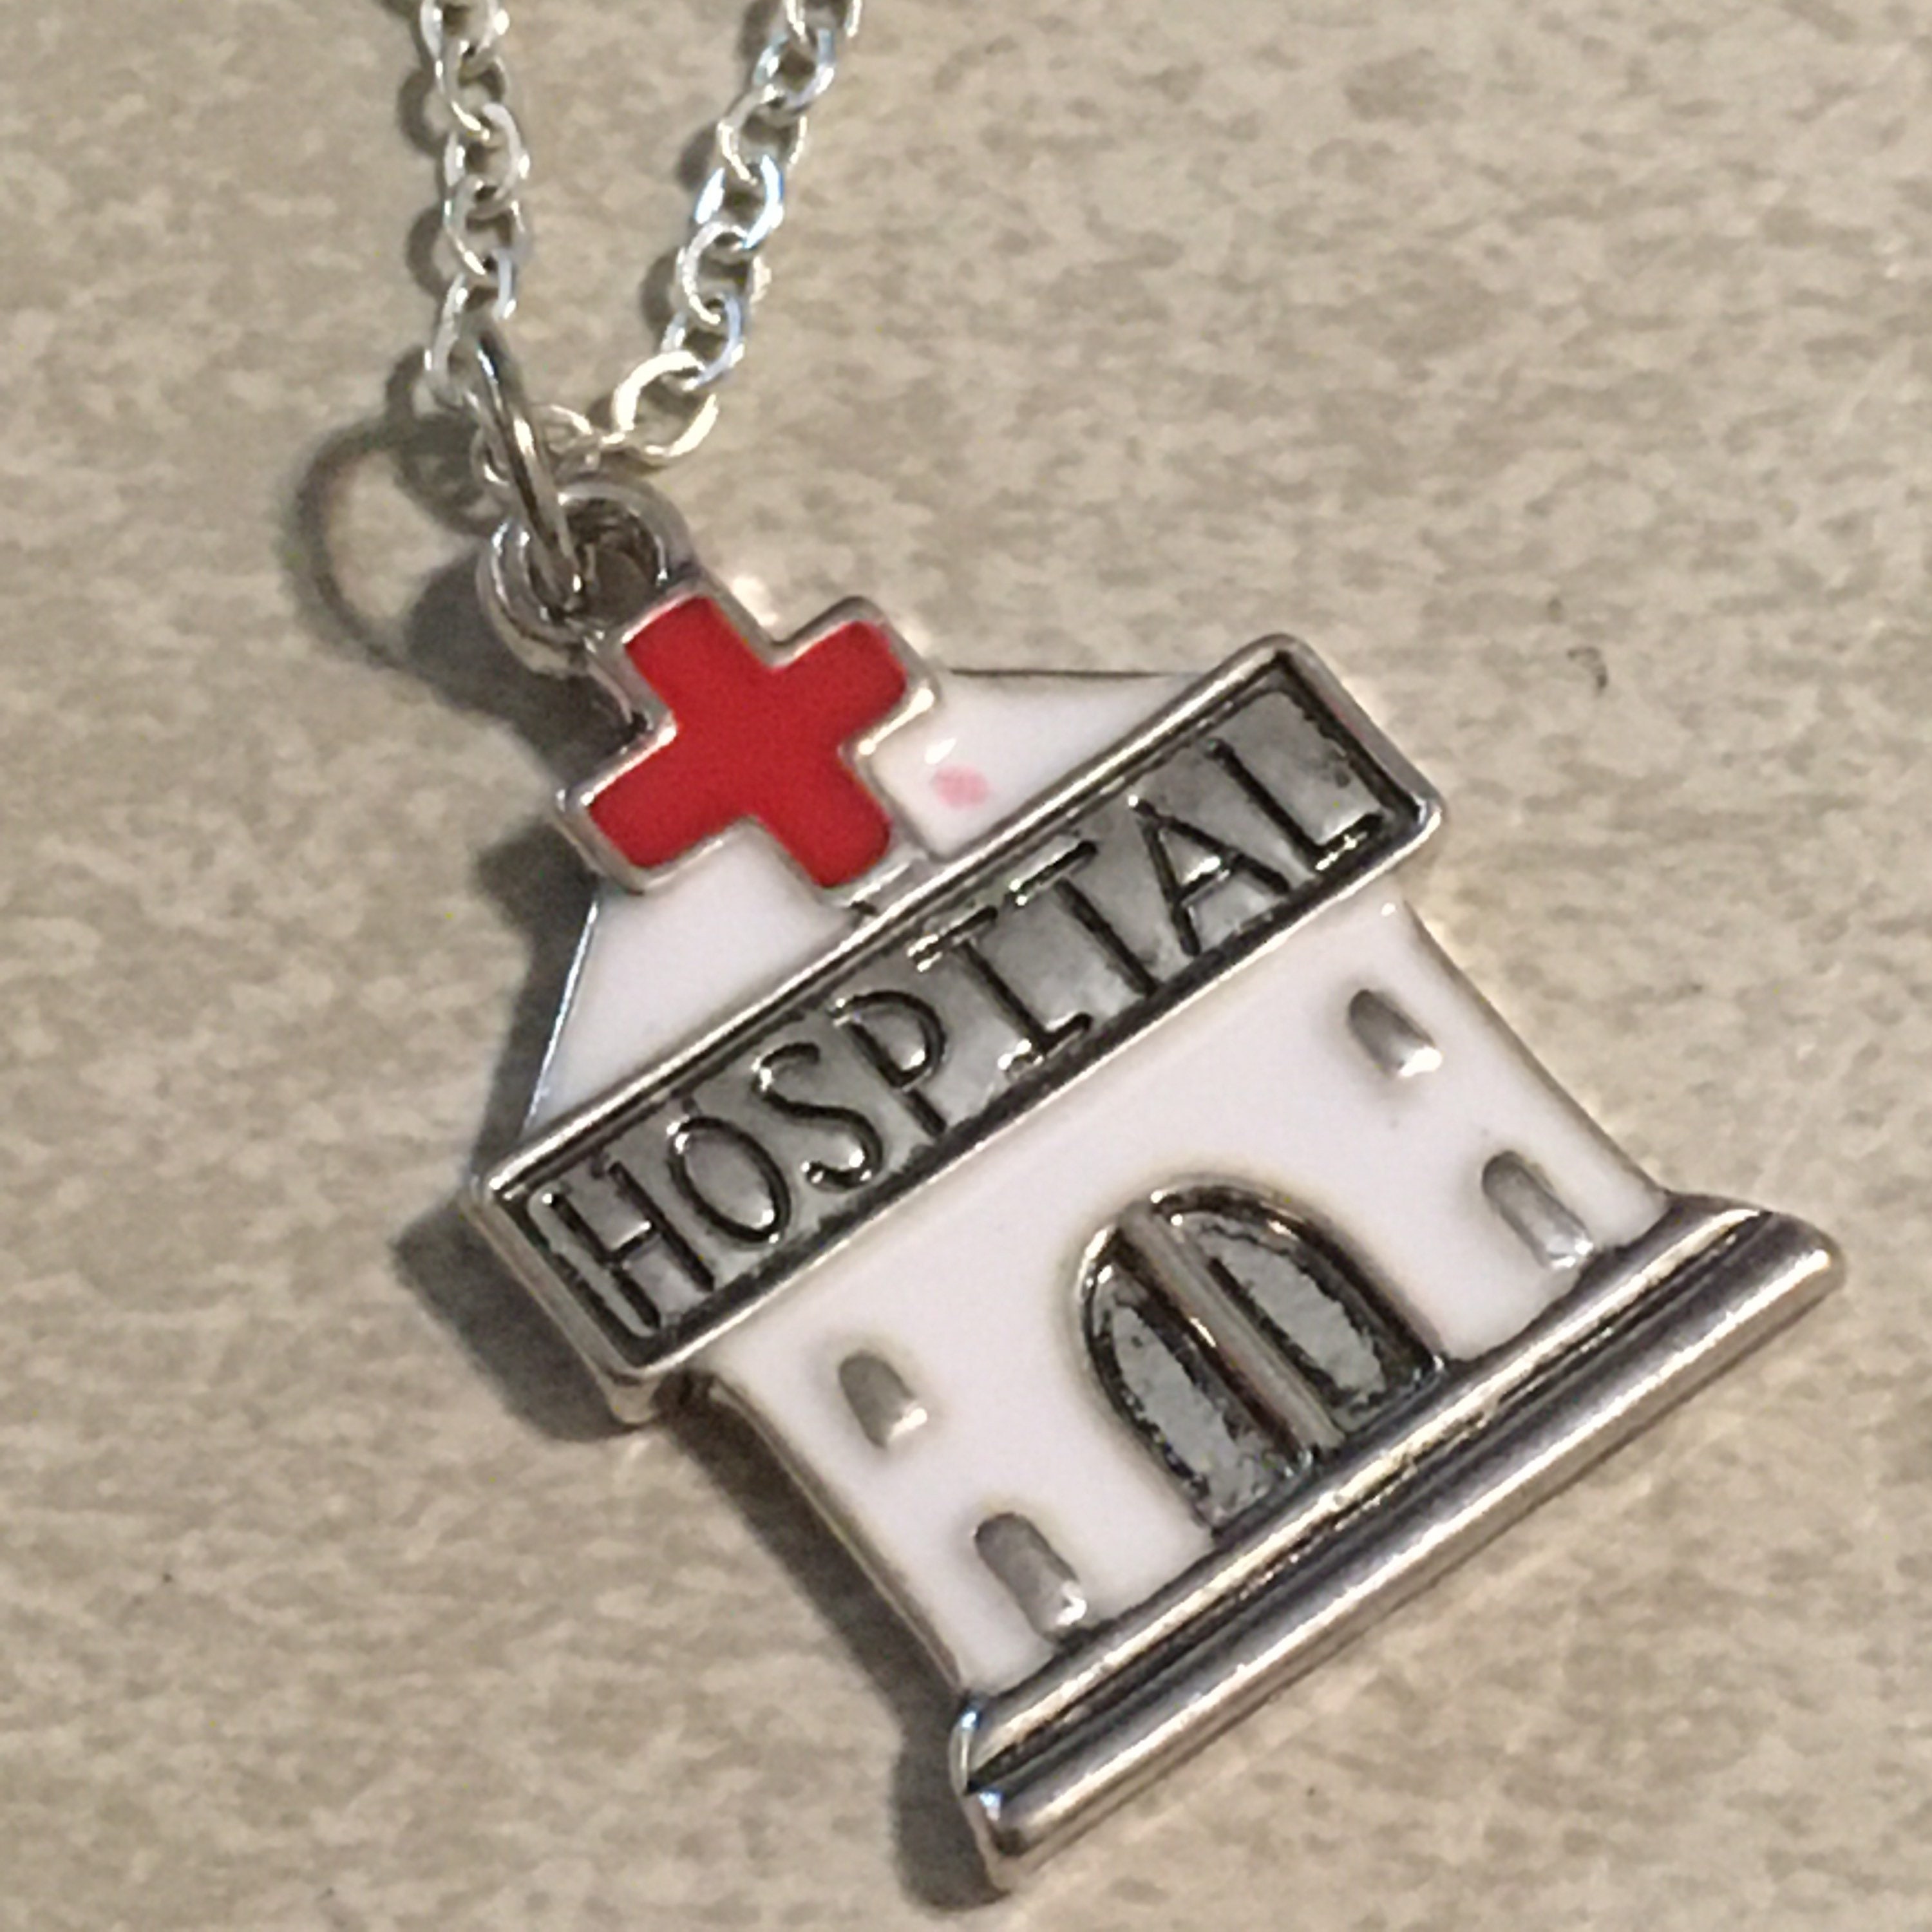 Hospital Charm Necklace Silver Chain Hospital Jewelry | Etsy